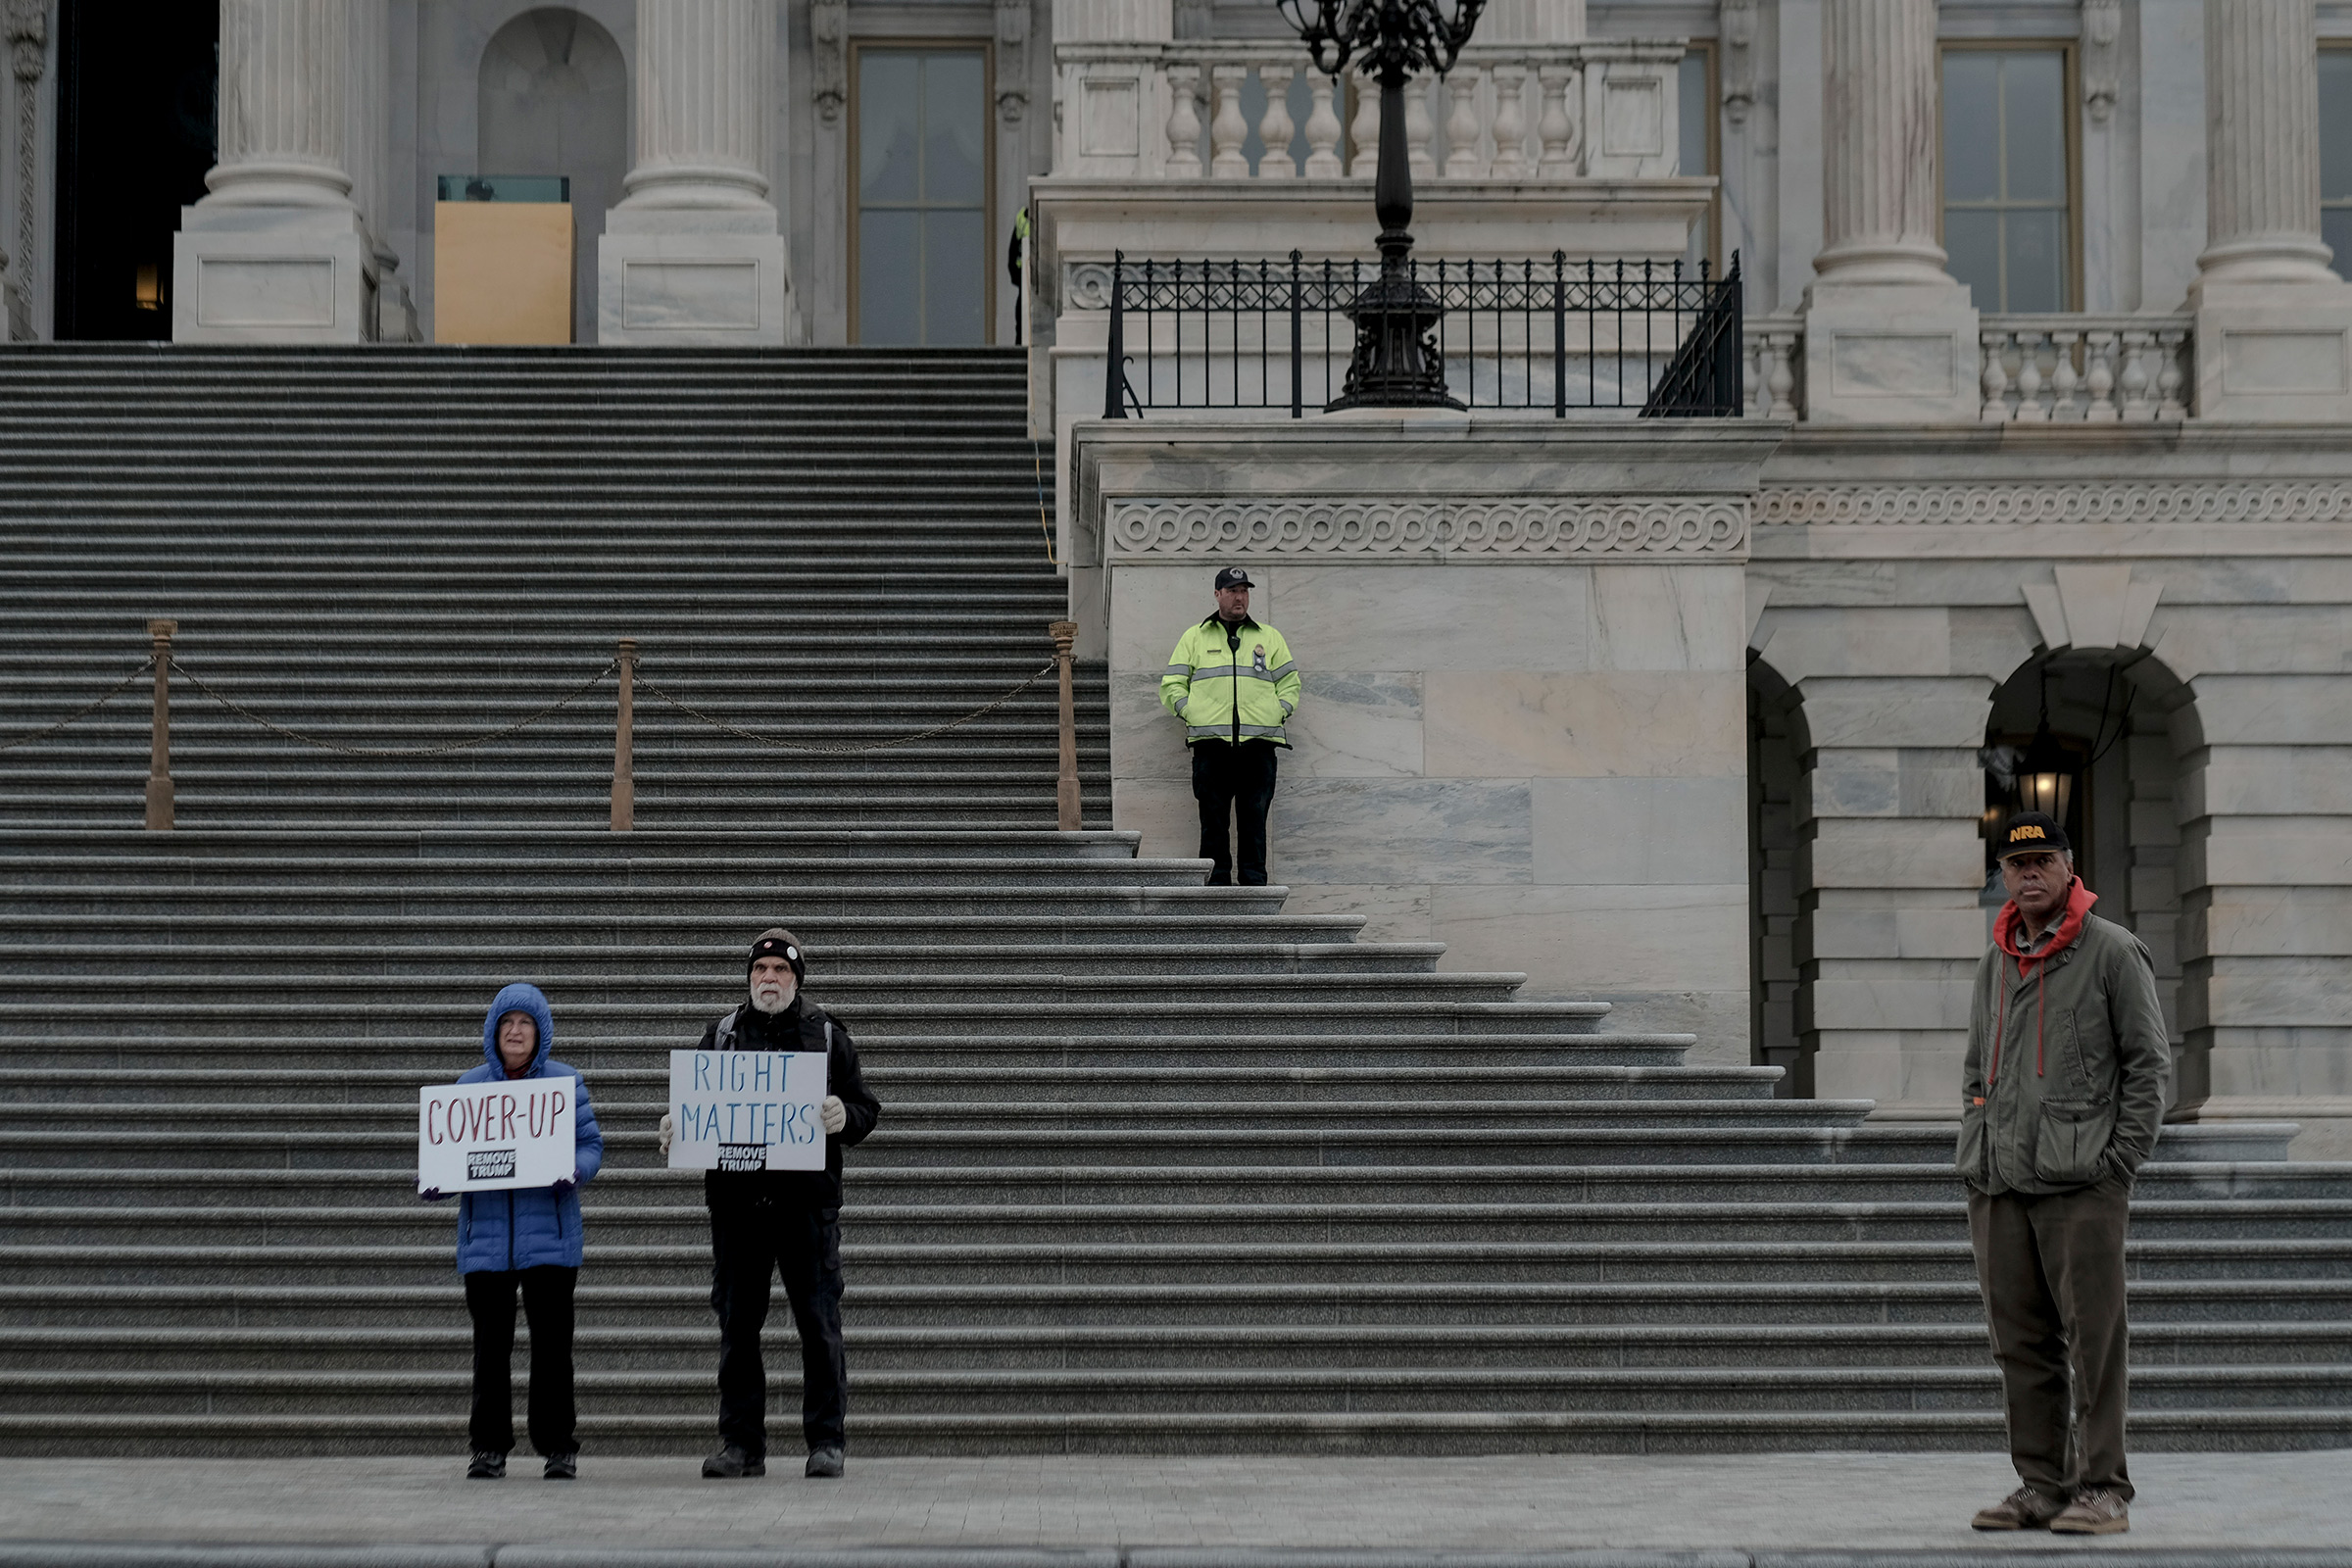 A few protestors demonstrate outside the senate chamber during the impeachment trial Saturday morning in Washington, D.C., on Jan. 25, 2020. (Gabriella Demczuk for TIME)